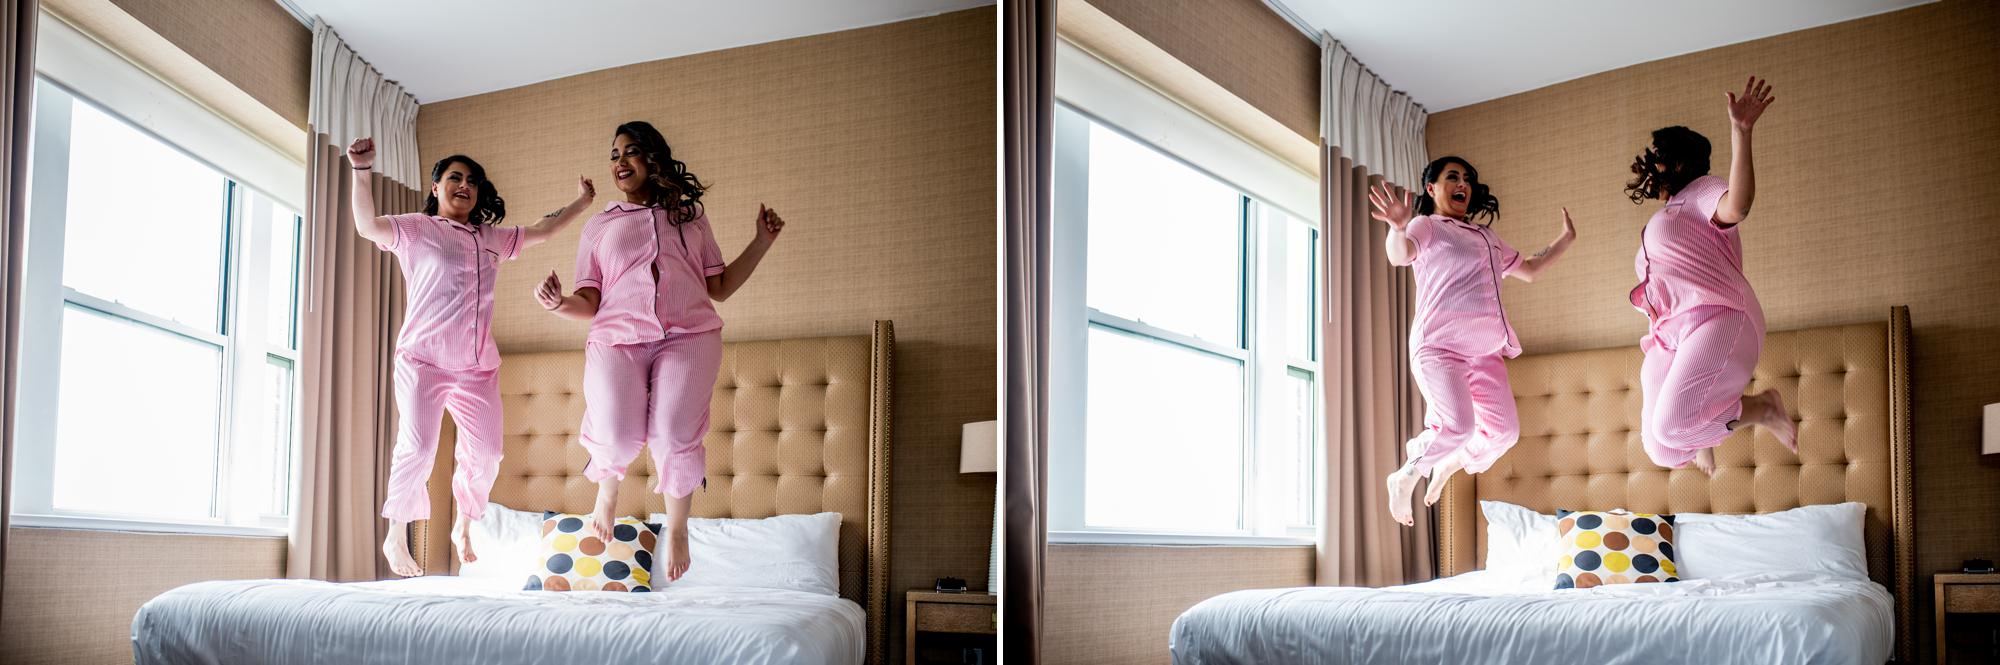 Bride Jumping on Bed | Pink Pajamas | Shooting for Kit and Bug Photography | Asbury Park Photographer | Spring Lake Photographer | Wedding Photographer | Jersey Shore Photographer